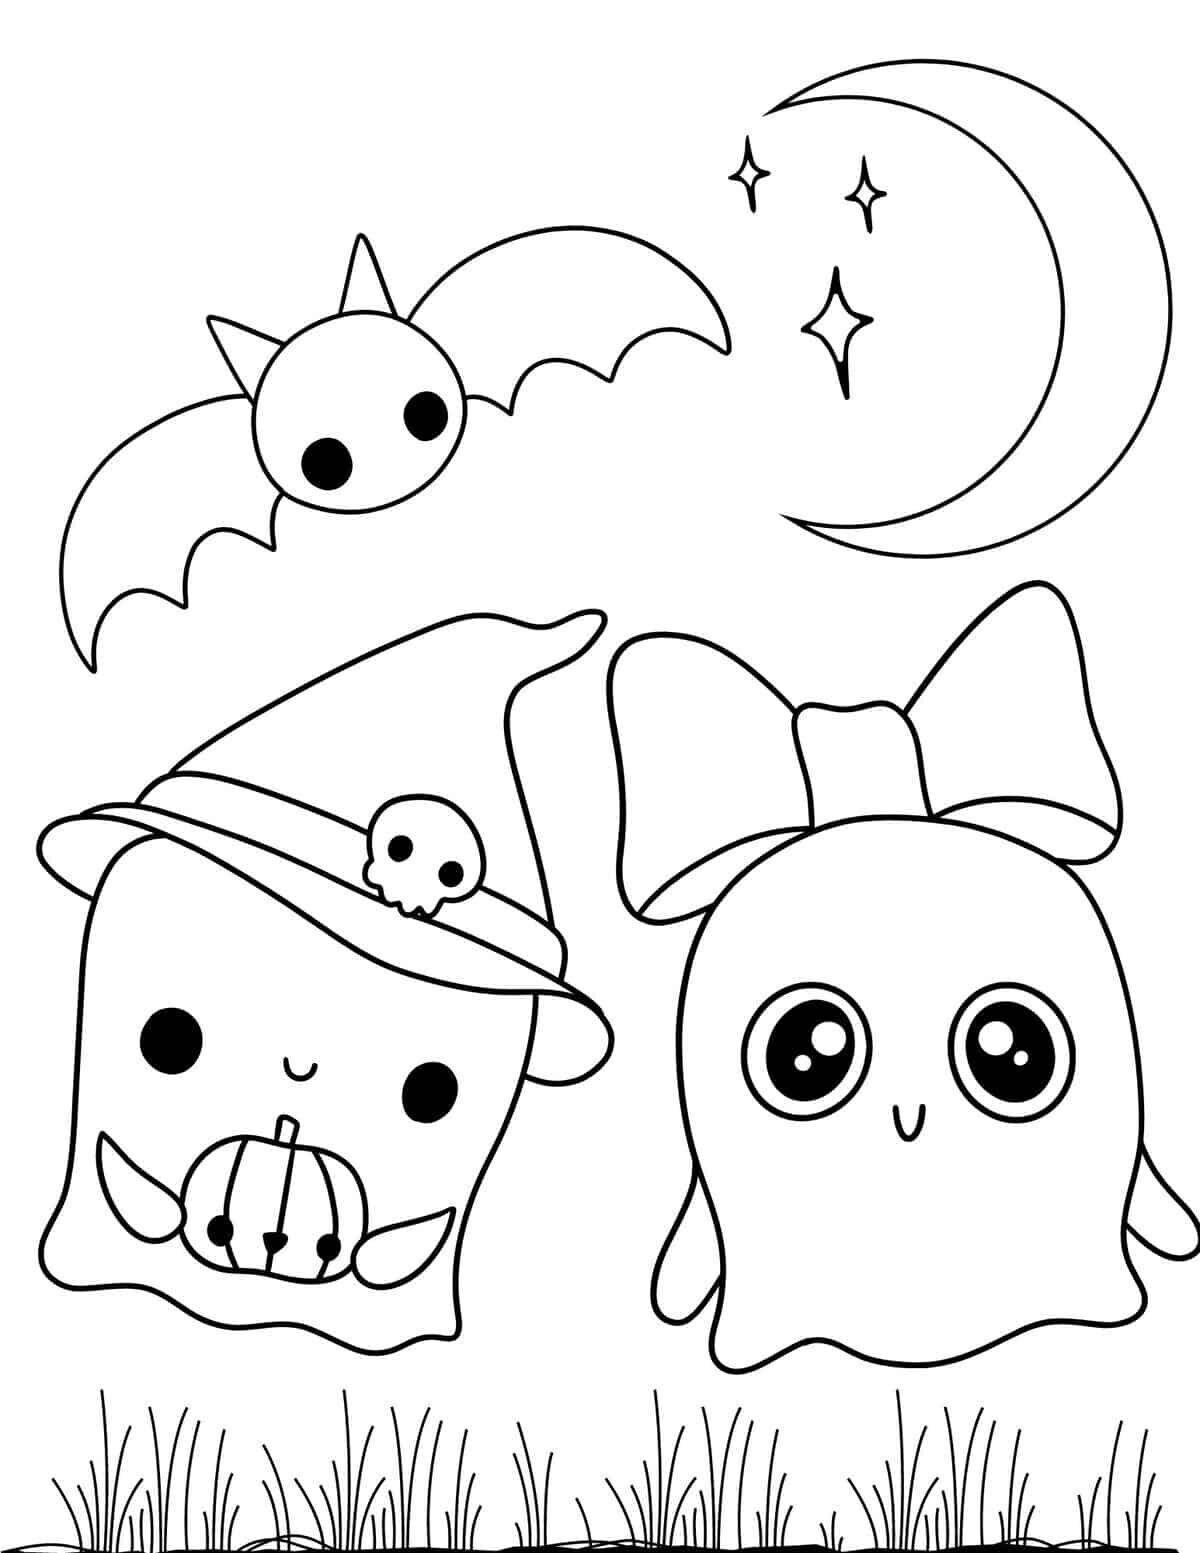 30 Free Printable Fall Coloring Pages - Prudent Penny Pincher